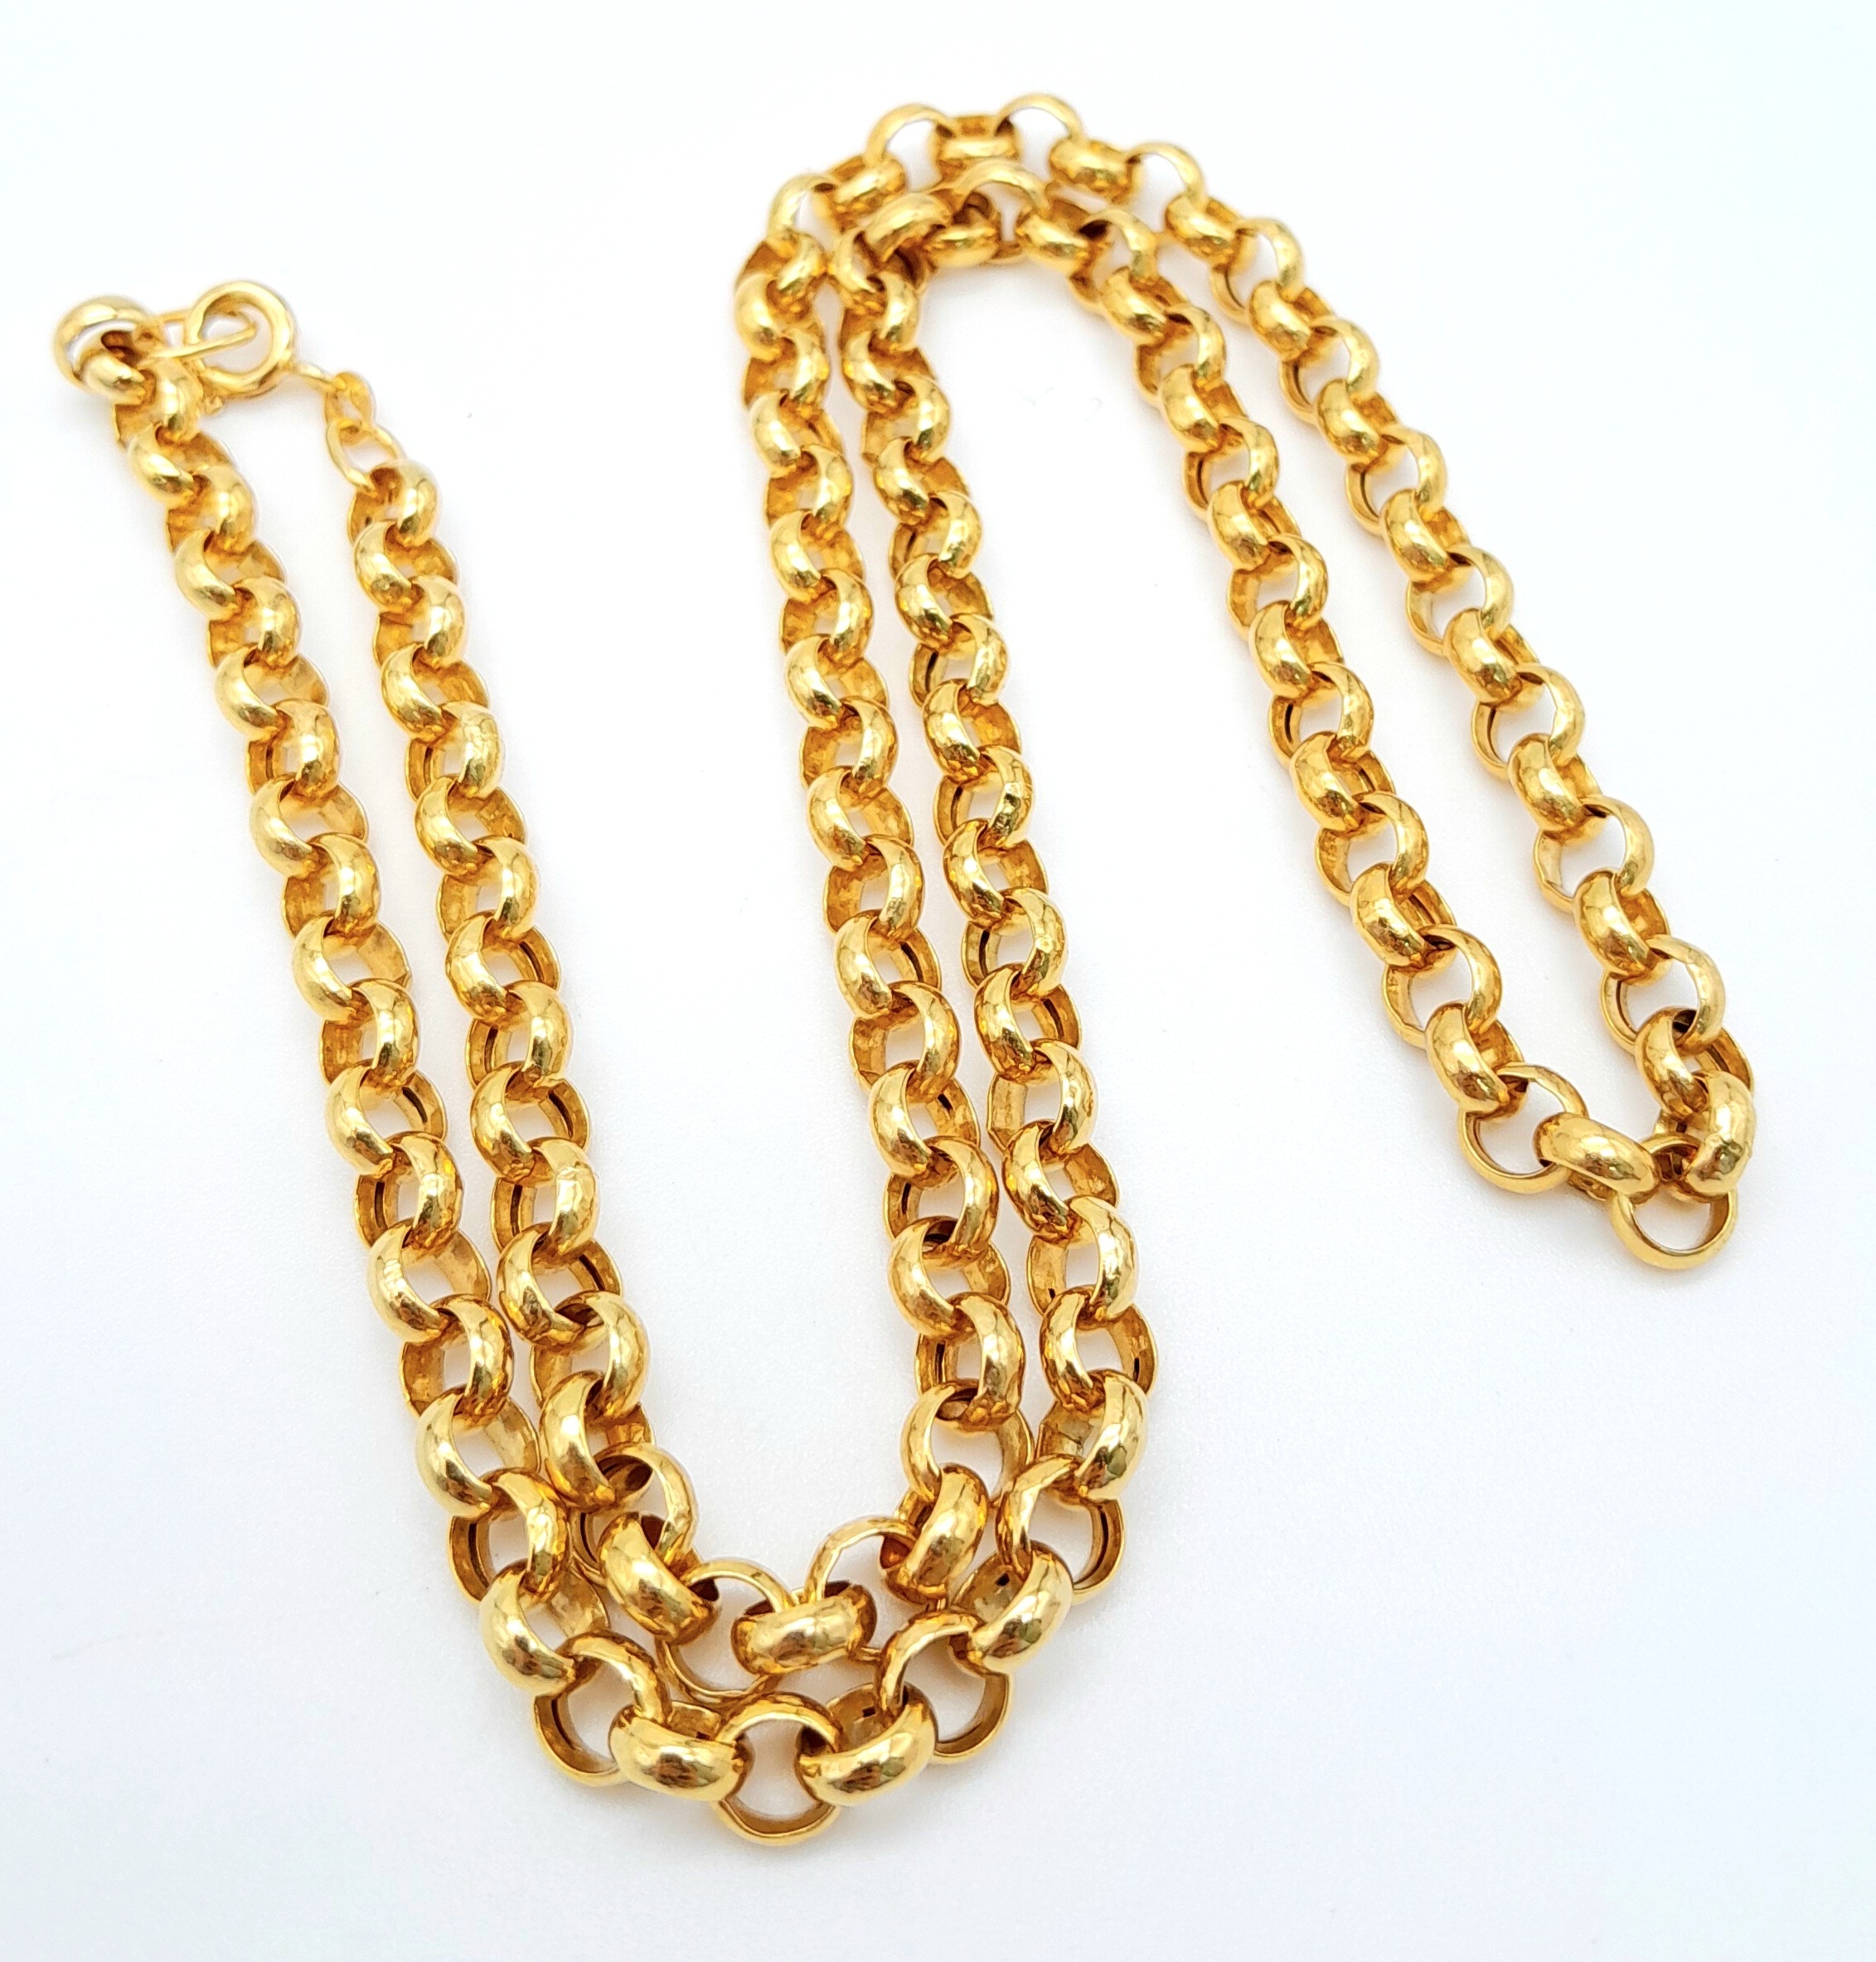 An Italian 9K Yellow Gold Belcher Chain/Necklace. 48cm. 12.2g weight. - Image 5 of 5